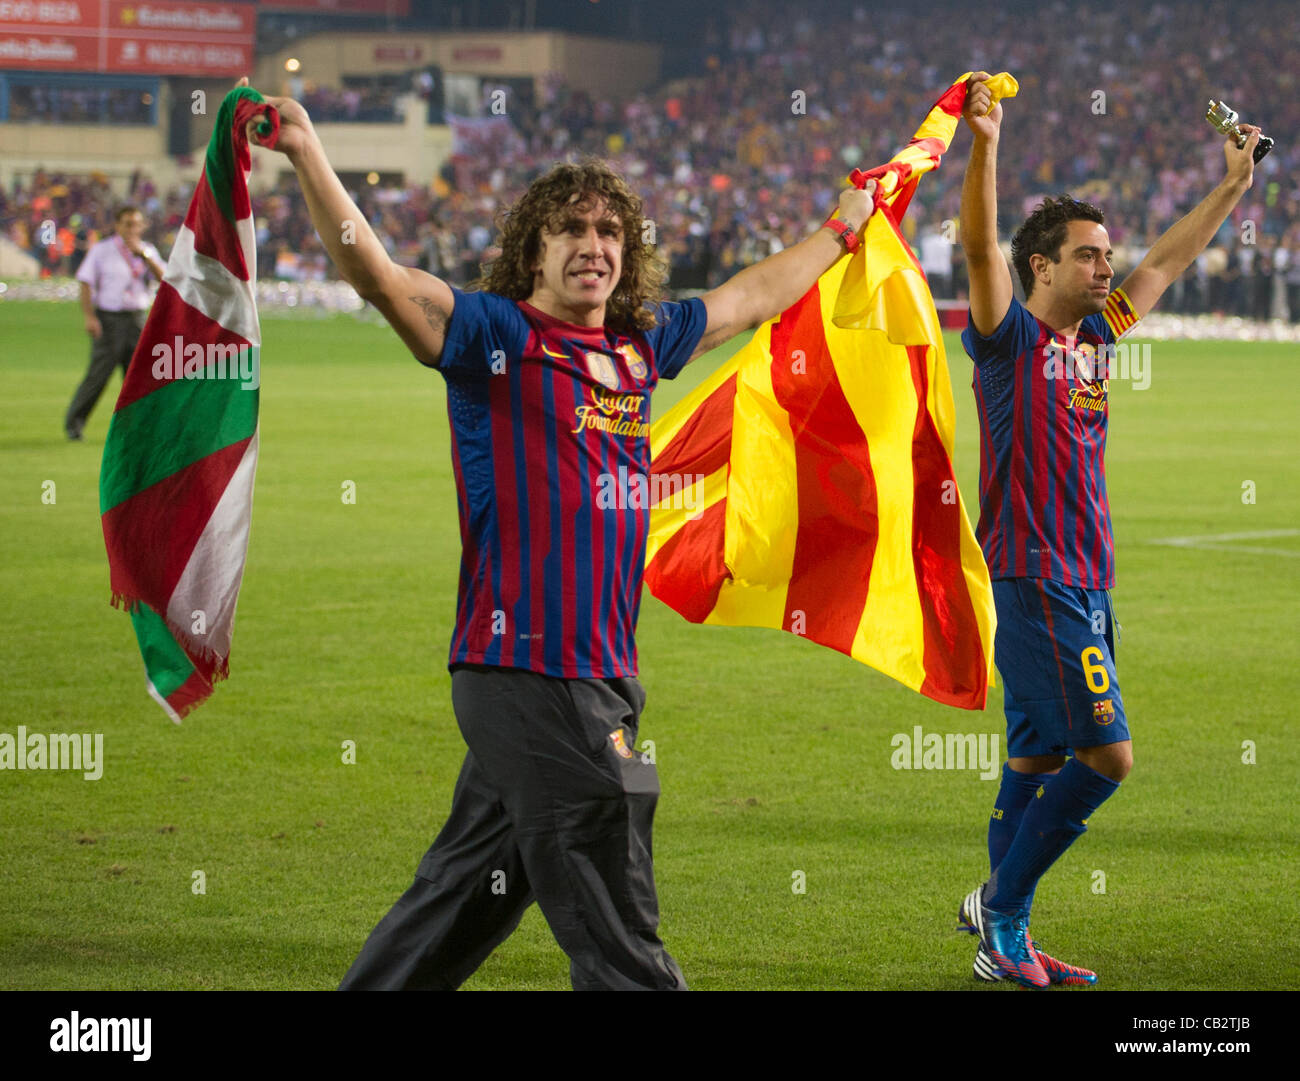 MADRID, SPAIN - MAY 25:  Carles Puyol an Xavi Hernandez, from F.C.Barcelona, greet supporters holding flags after beating Athletic de Bilbao in the Copa del Rey Final for 3-0 at Vicente Calderon Stadium on May 25, 2012 in Madrid, Spain. (Credits : J.M.Colomo/GRUPPO) Stock Photo